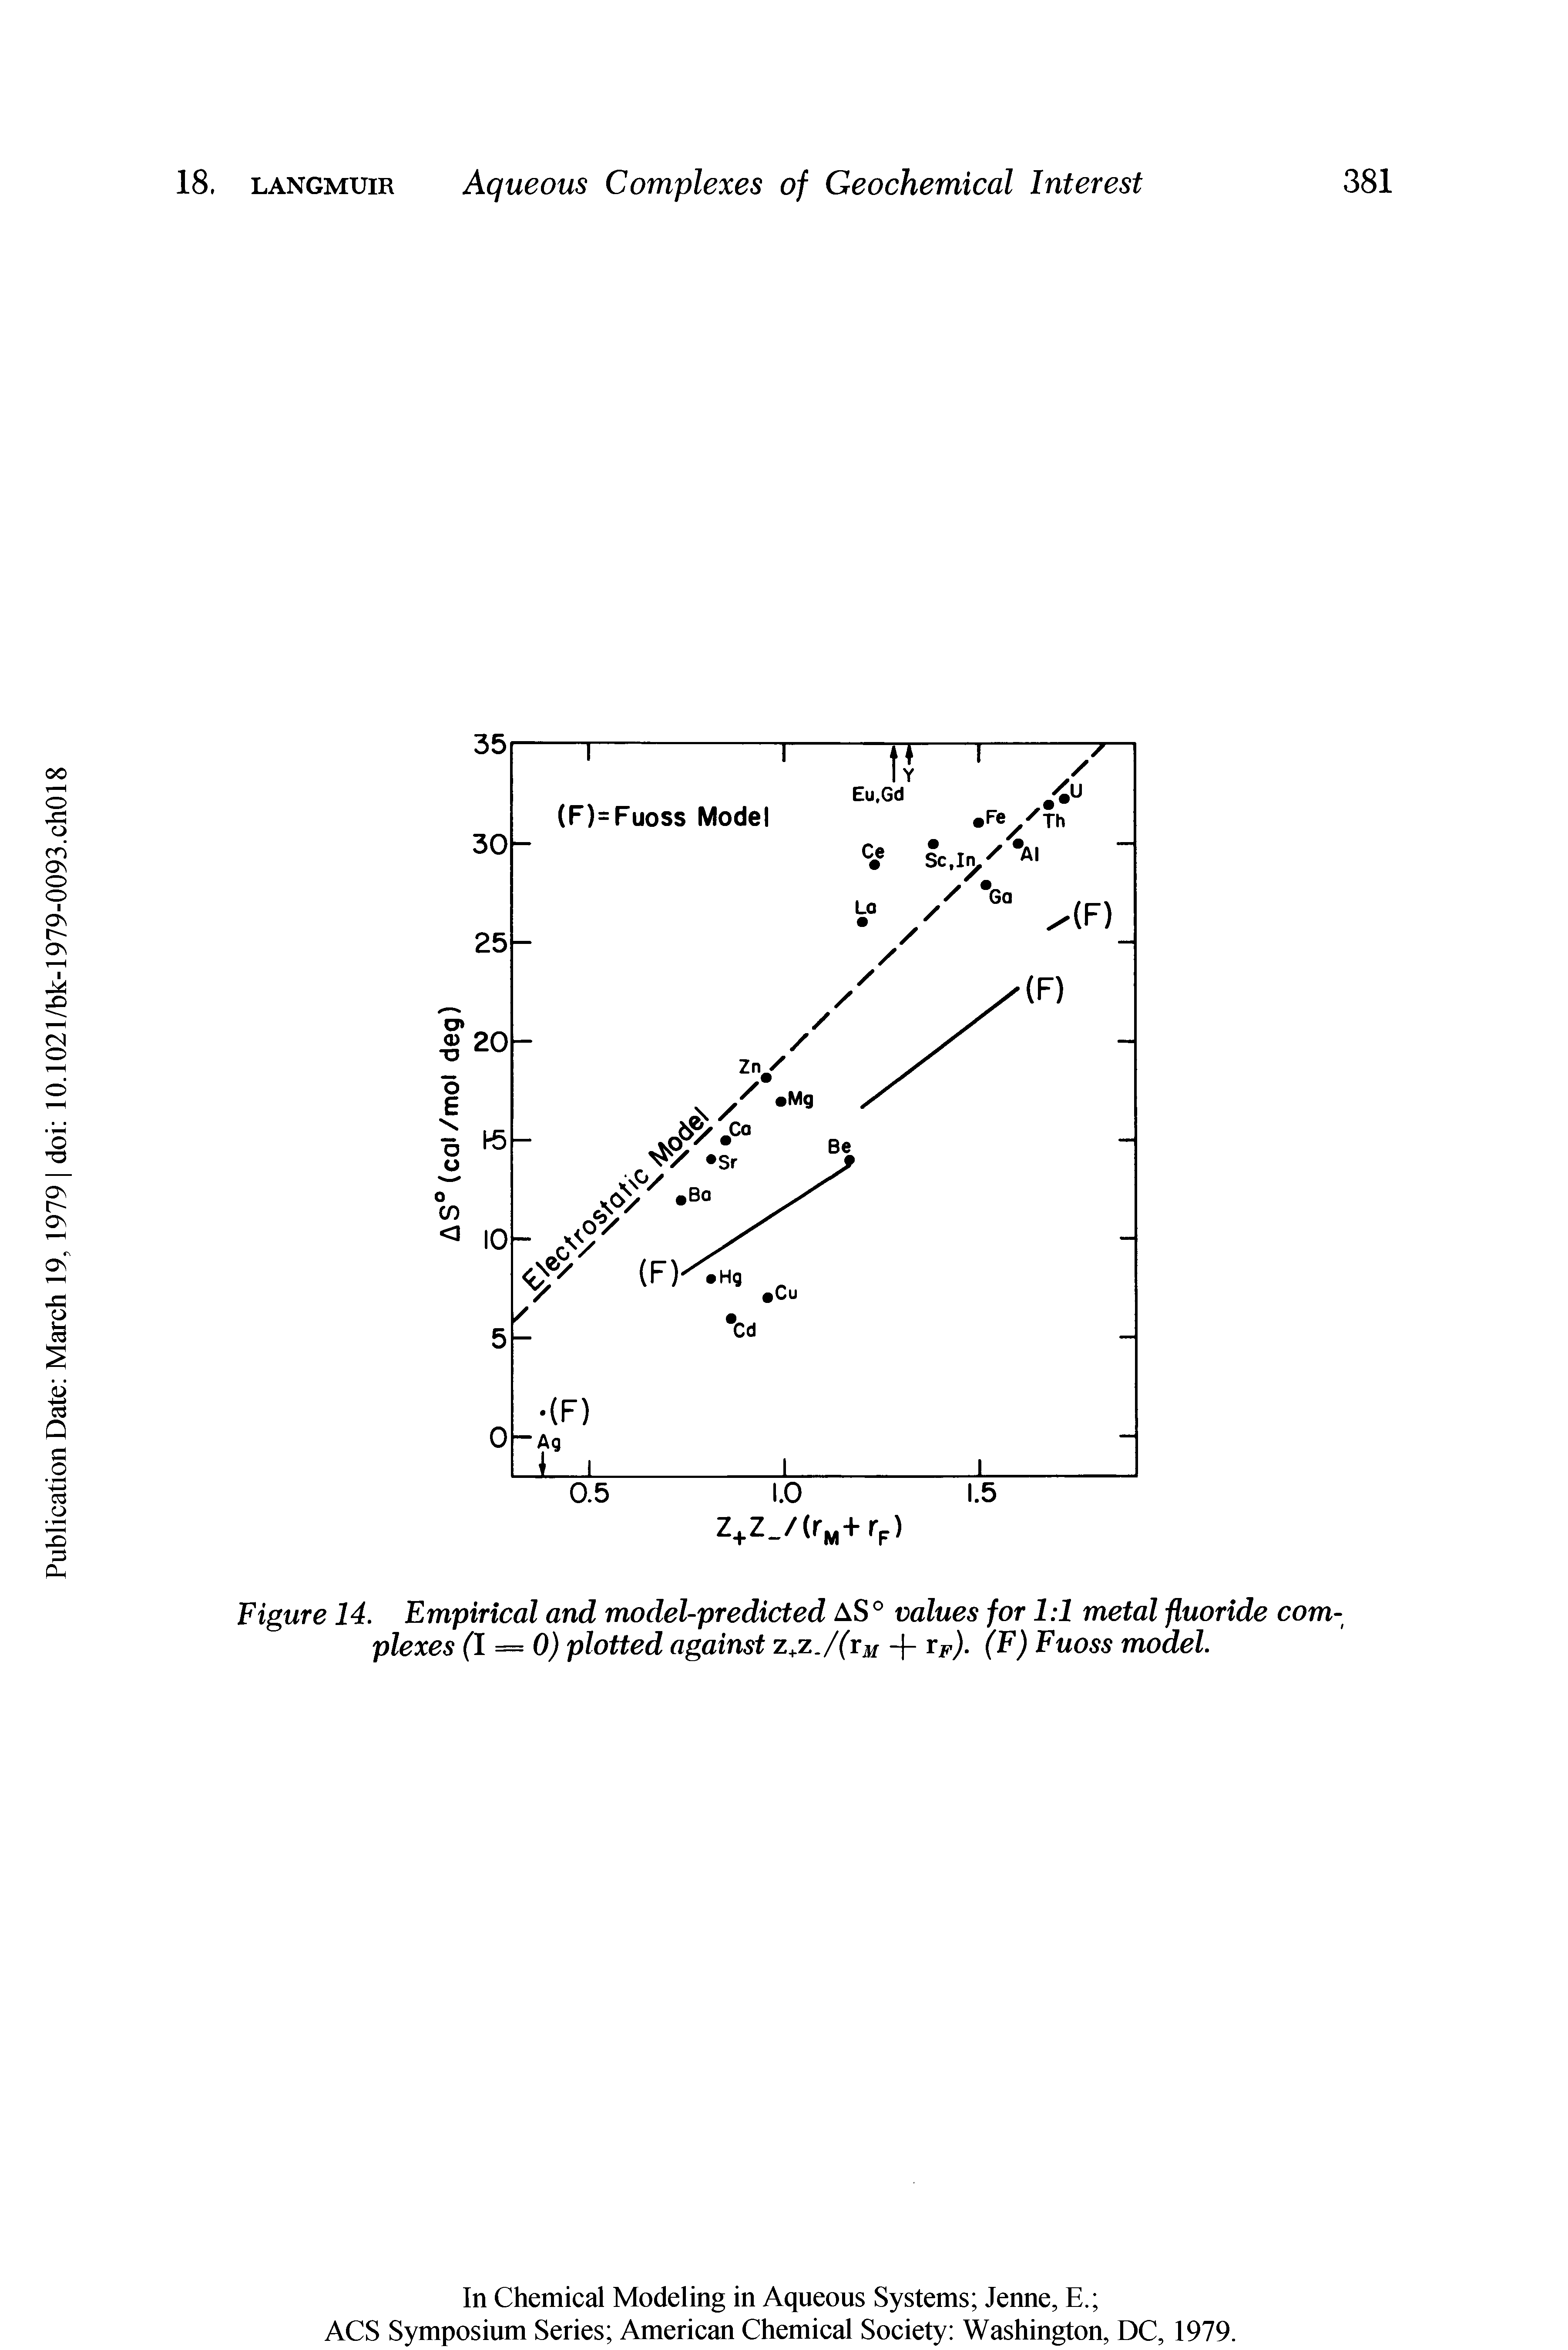 Figure 14. Empirical and model-predicted AS° values for 1 1 metal fluoride complexes fl = 0) plotted against z z./(ym + f)- (F) Fuoss model.